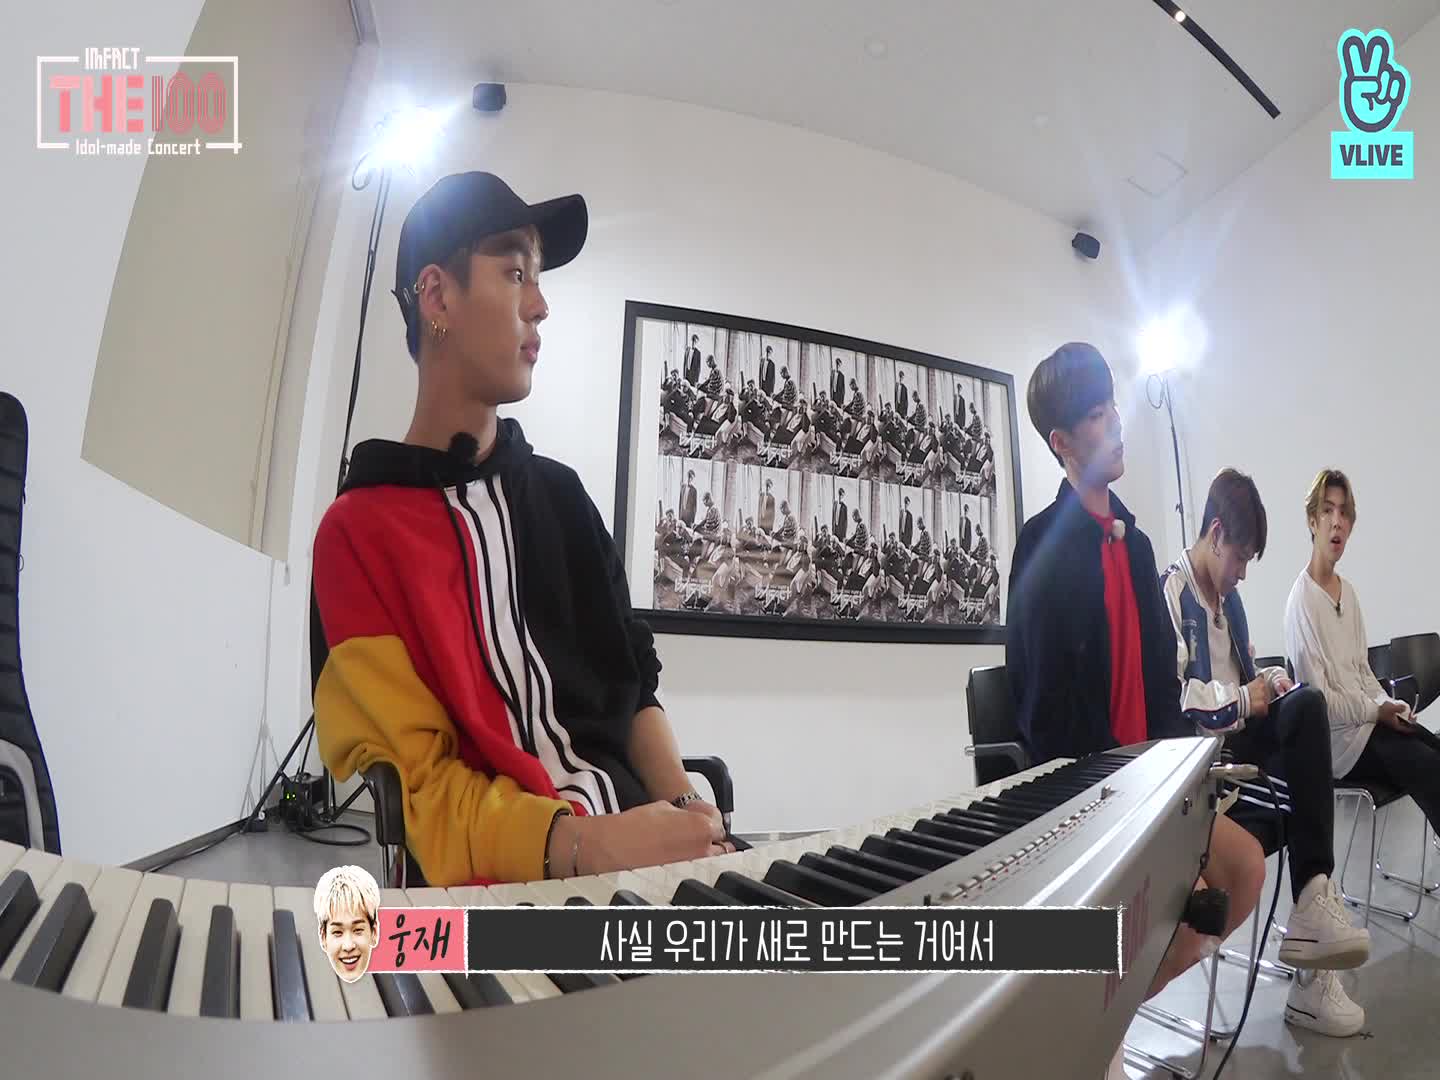 [THE100_IMFACT] On the "Road" for IMFACT, there is only practice - 임팩트가 가는 '길'엔 only 연습..! Ep 20.